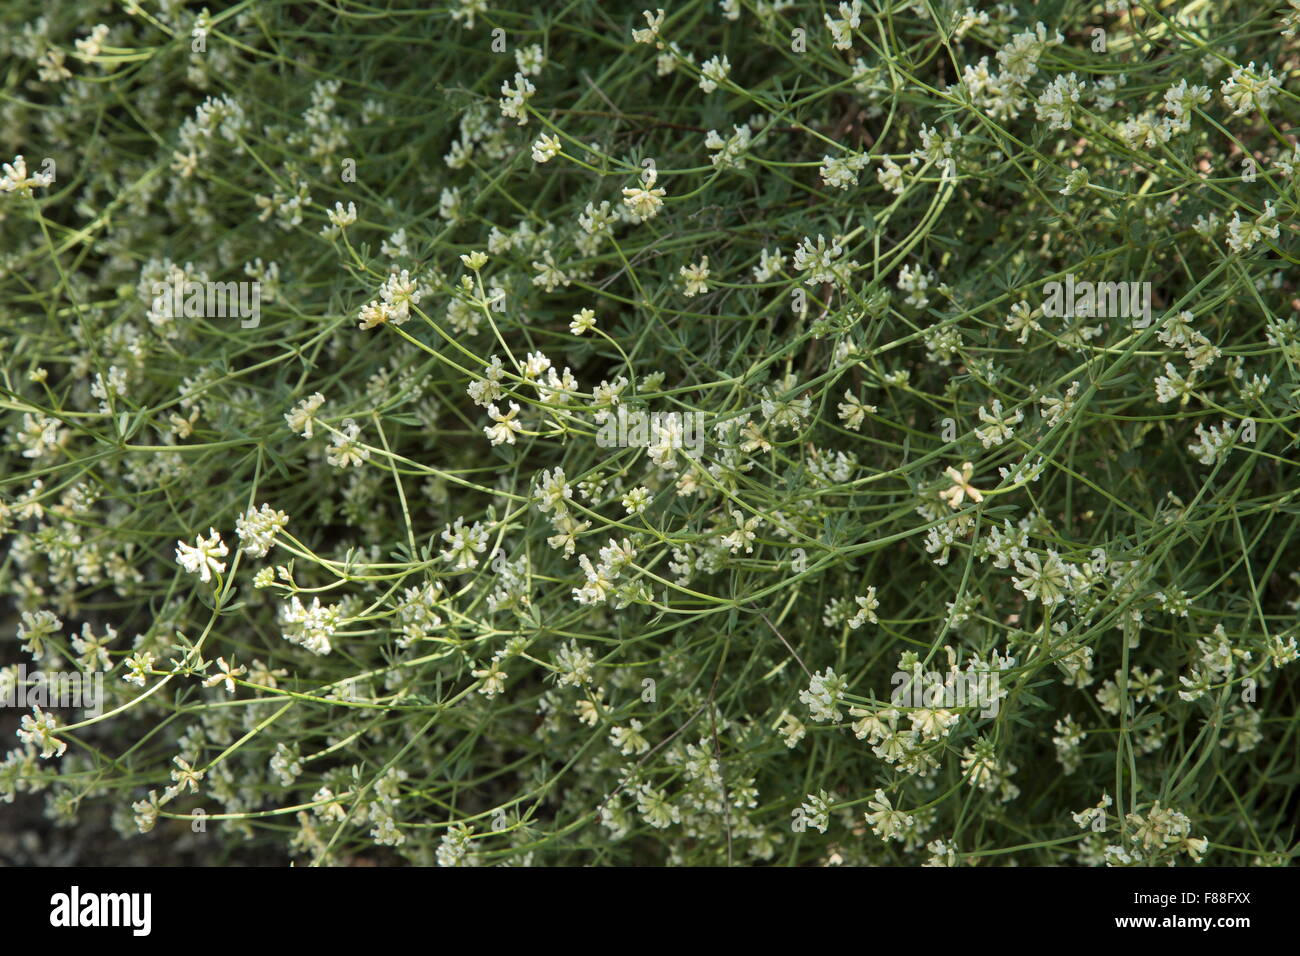 Prostrate Canary clover, Dorycnium pentaphyllum in flower. Spain. Stock Photo